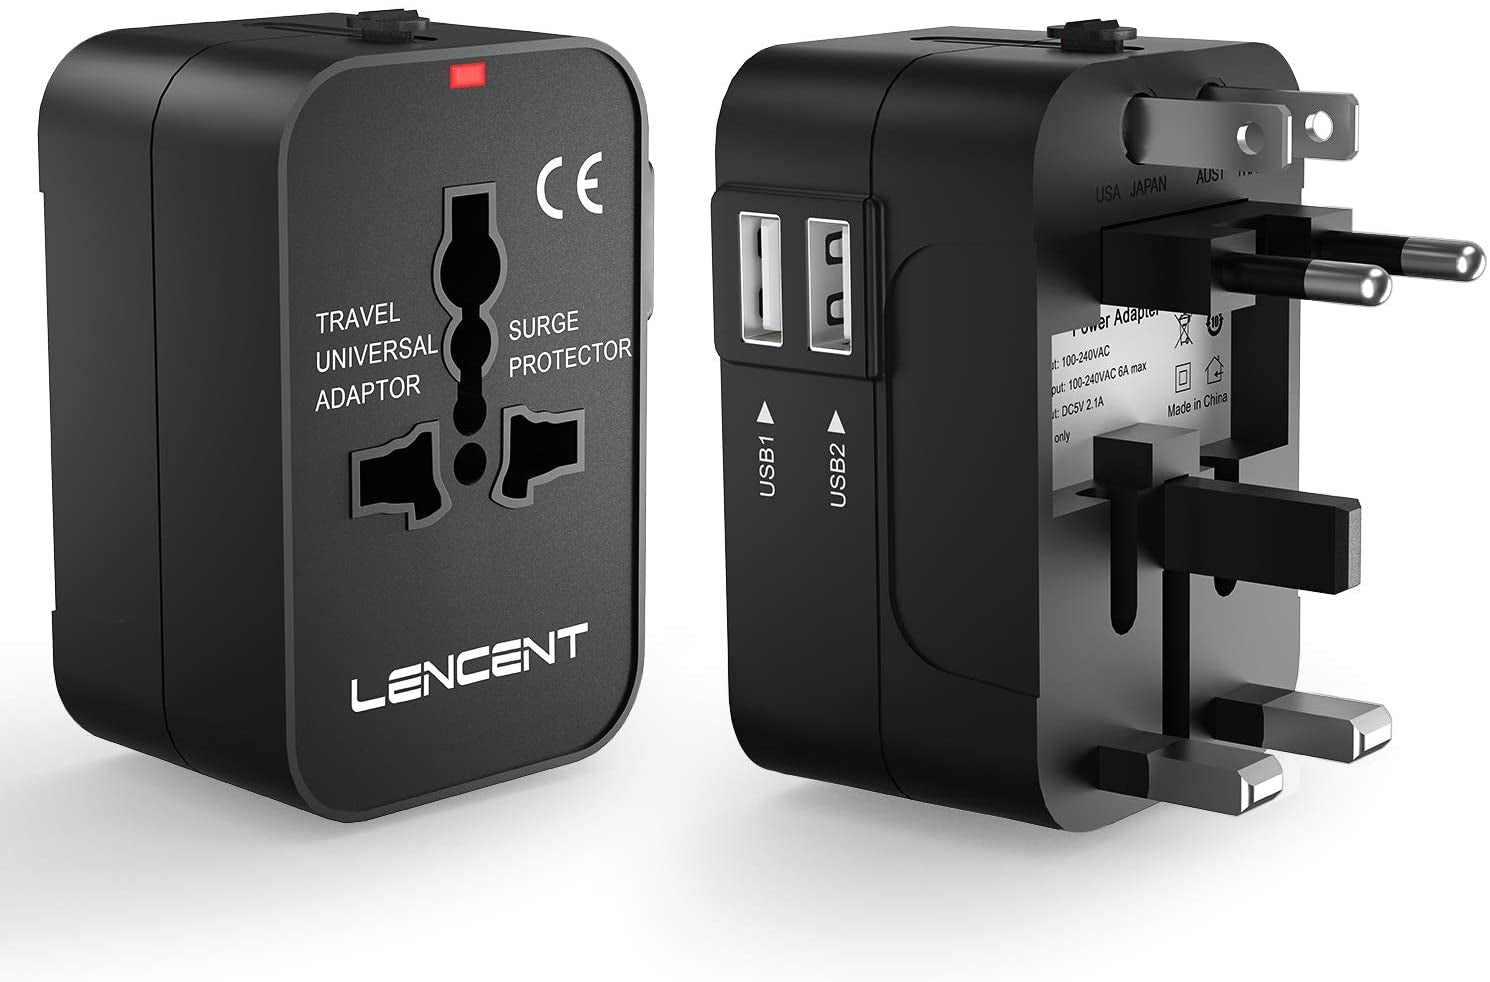 LENCENT, LENCENT Universal Travel Adaptor, All-In-One International Power Adapter, Worldwide Travel Charger for US, UK, EU, AU, over 200 Countries